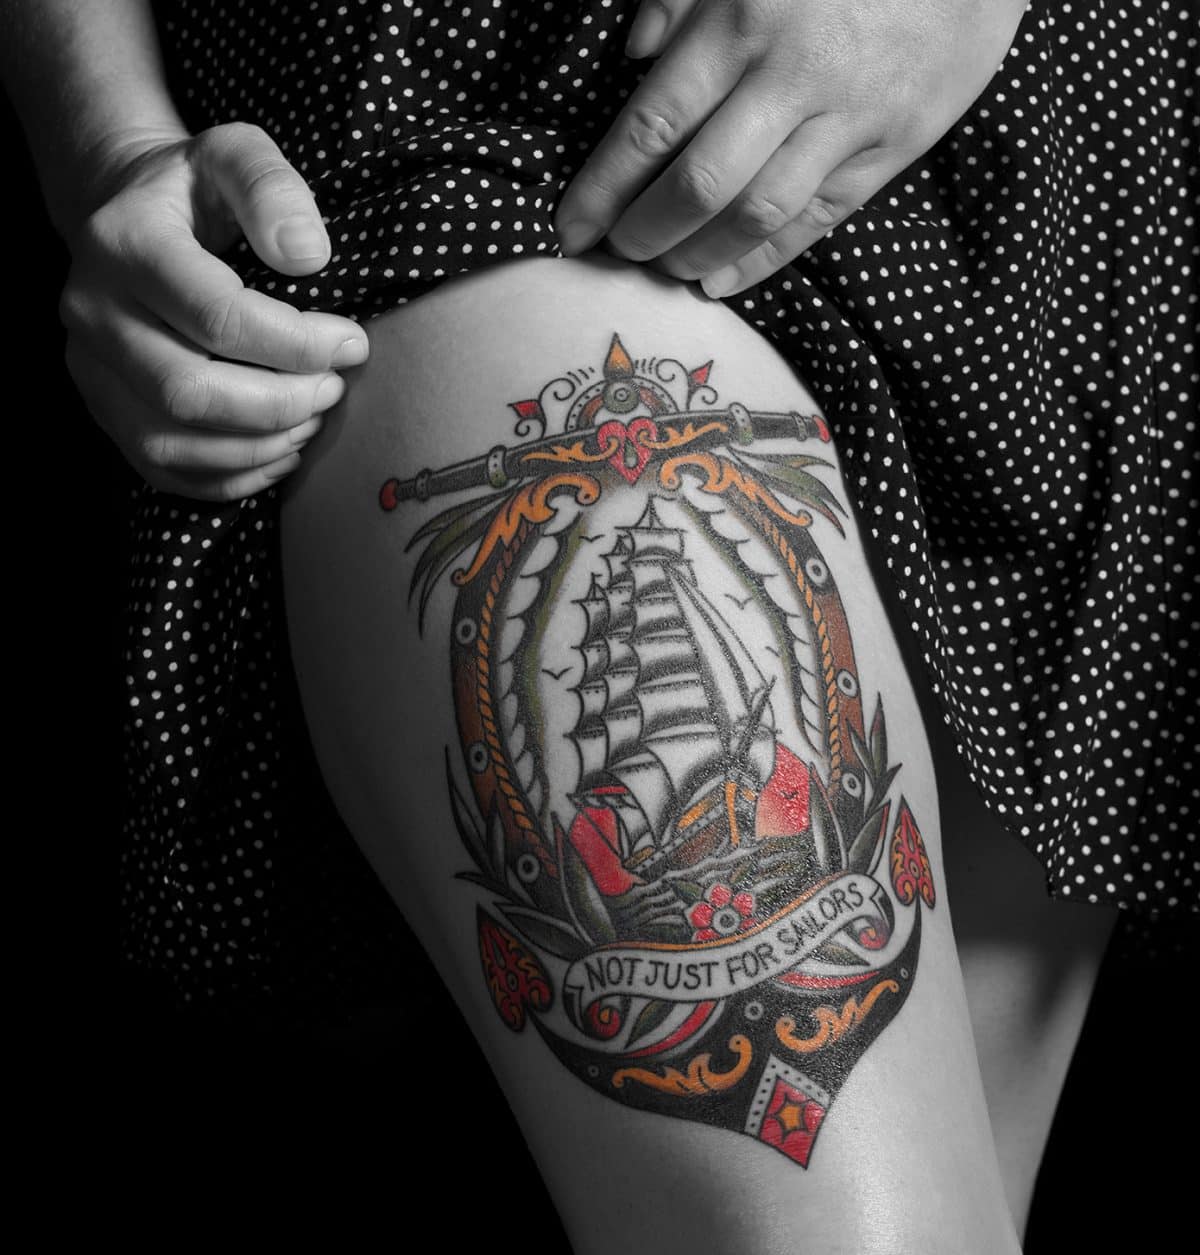 A close-up photo of a tattoo on a woman's thigh. The image is primarily in black and white, except for the small details of the tattoo.